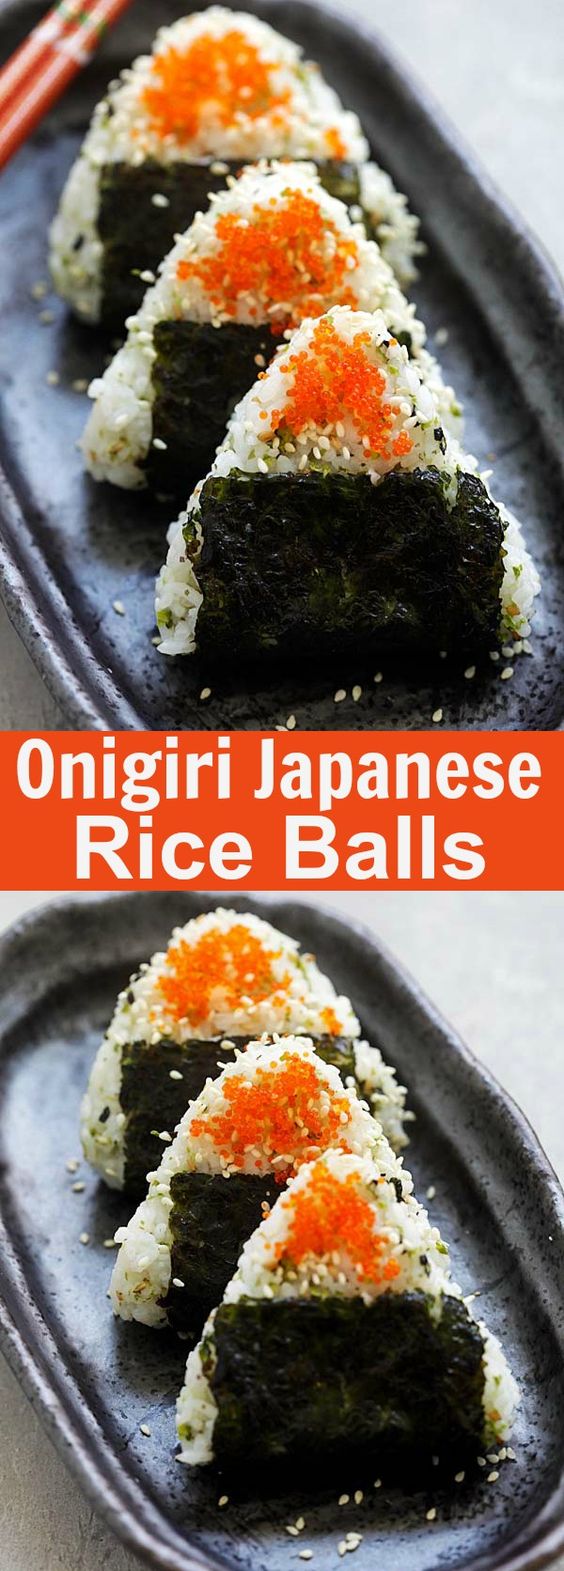 Onigiri - Easy and delicious Japanese rice balls shaped in triangles and wrapped with seaweeds. Topped with fish roes. So good | rasamalaysia.com